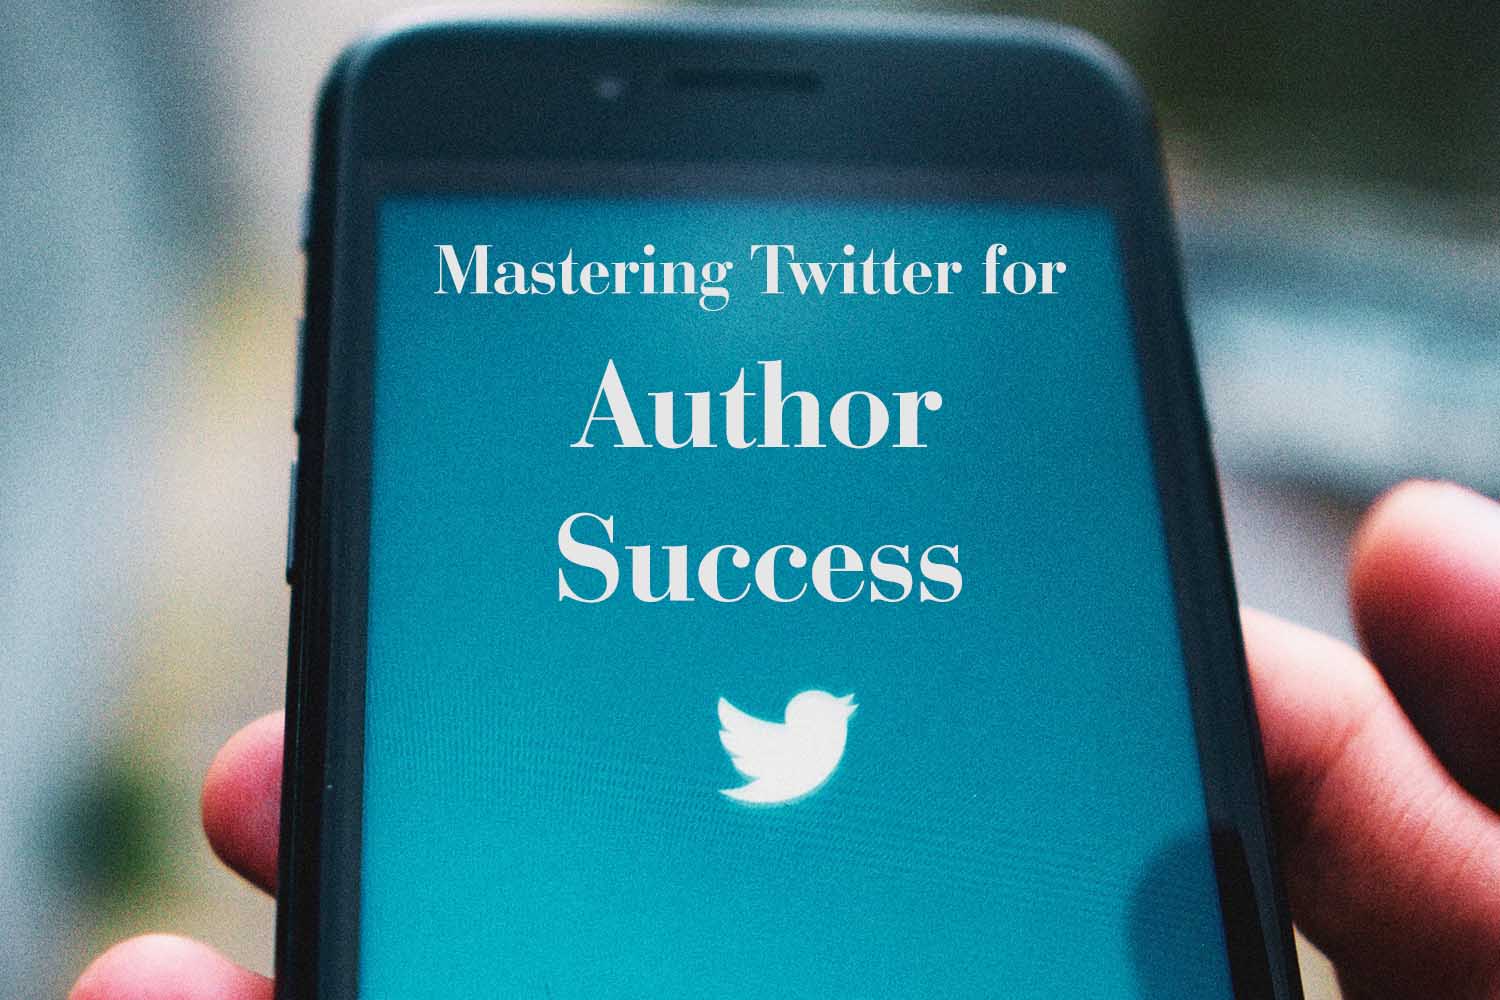 Mastering Twitter for Author Success